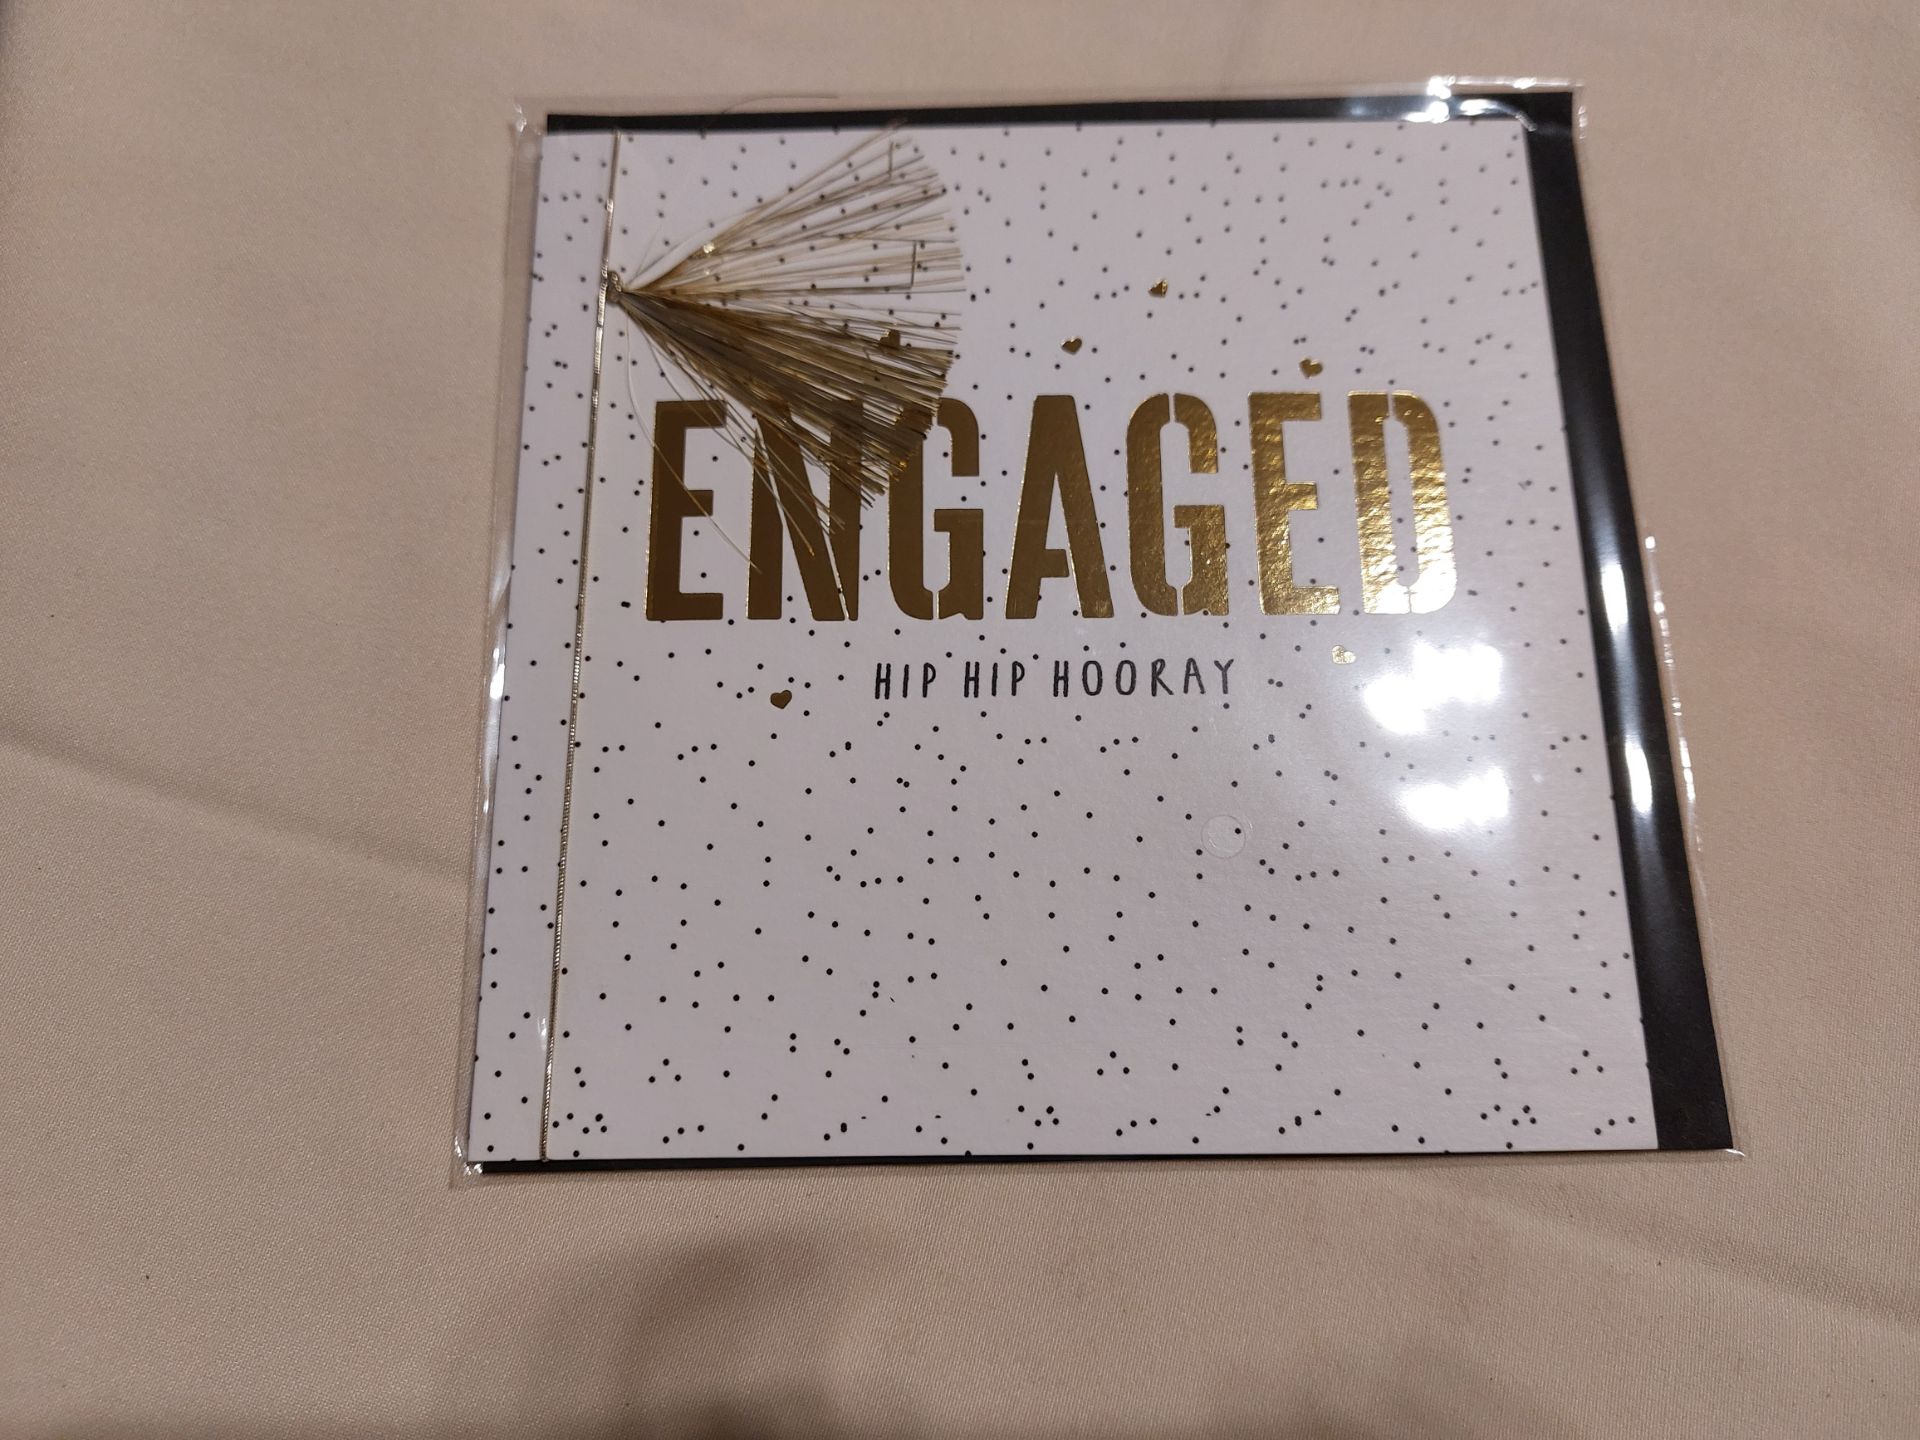 Top Quality Greetings Cards ""Engaged"" Box of 72 - Image 2 of 3